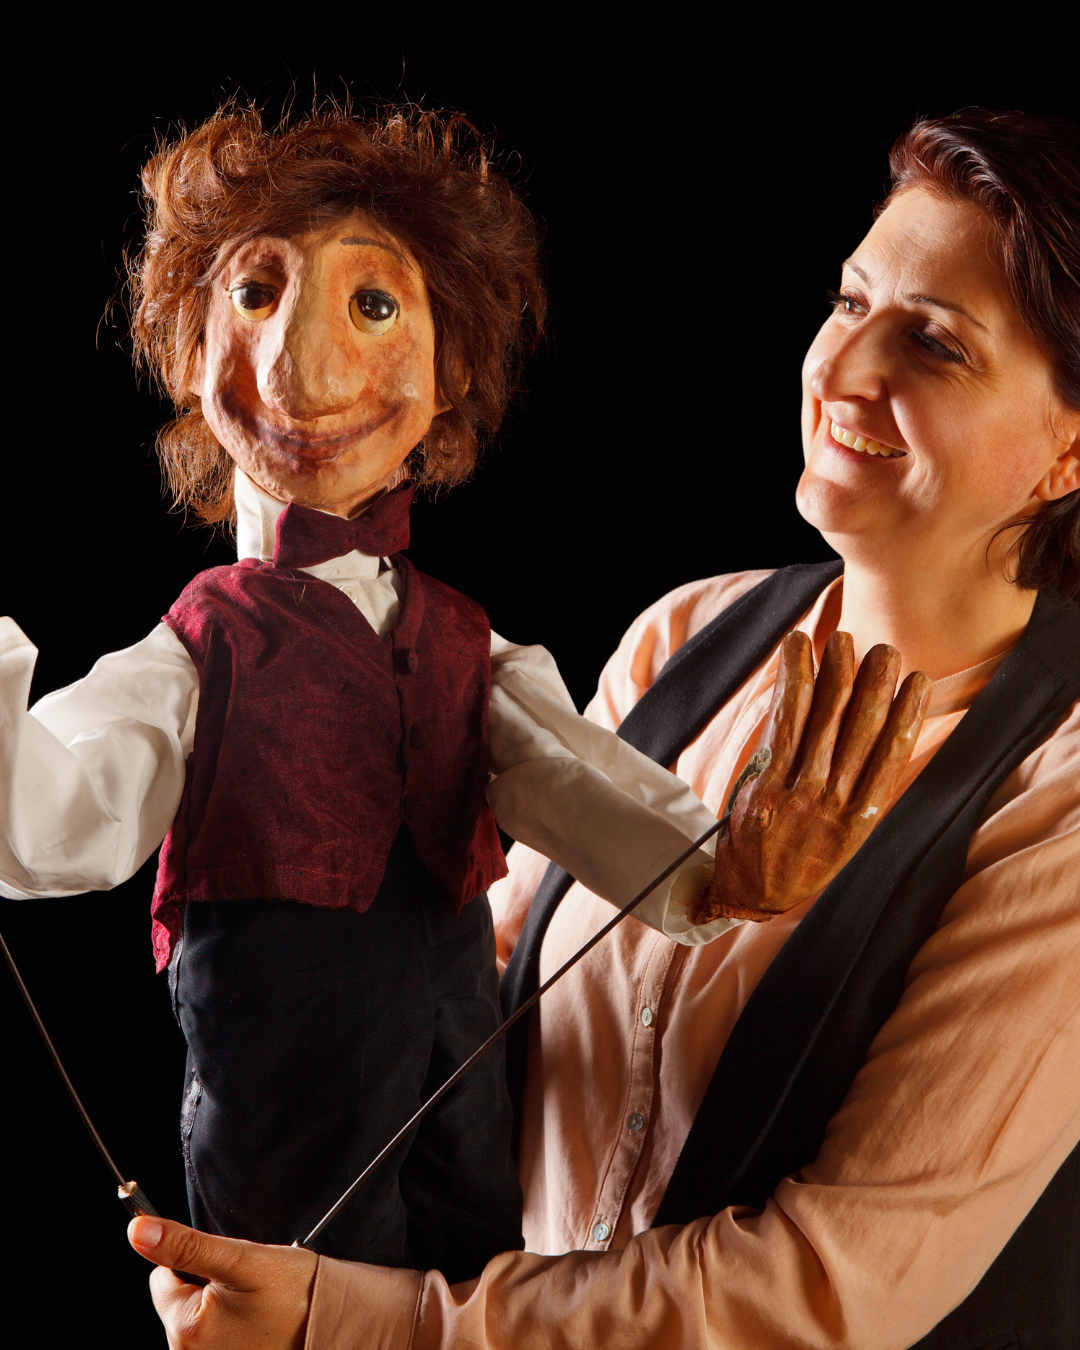 ventriloquist performer poses with puppet